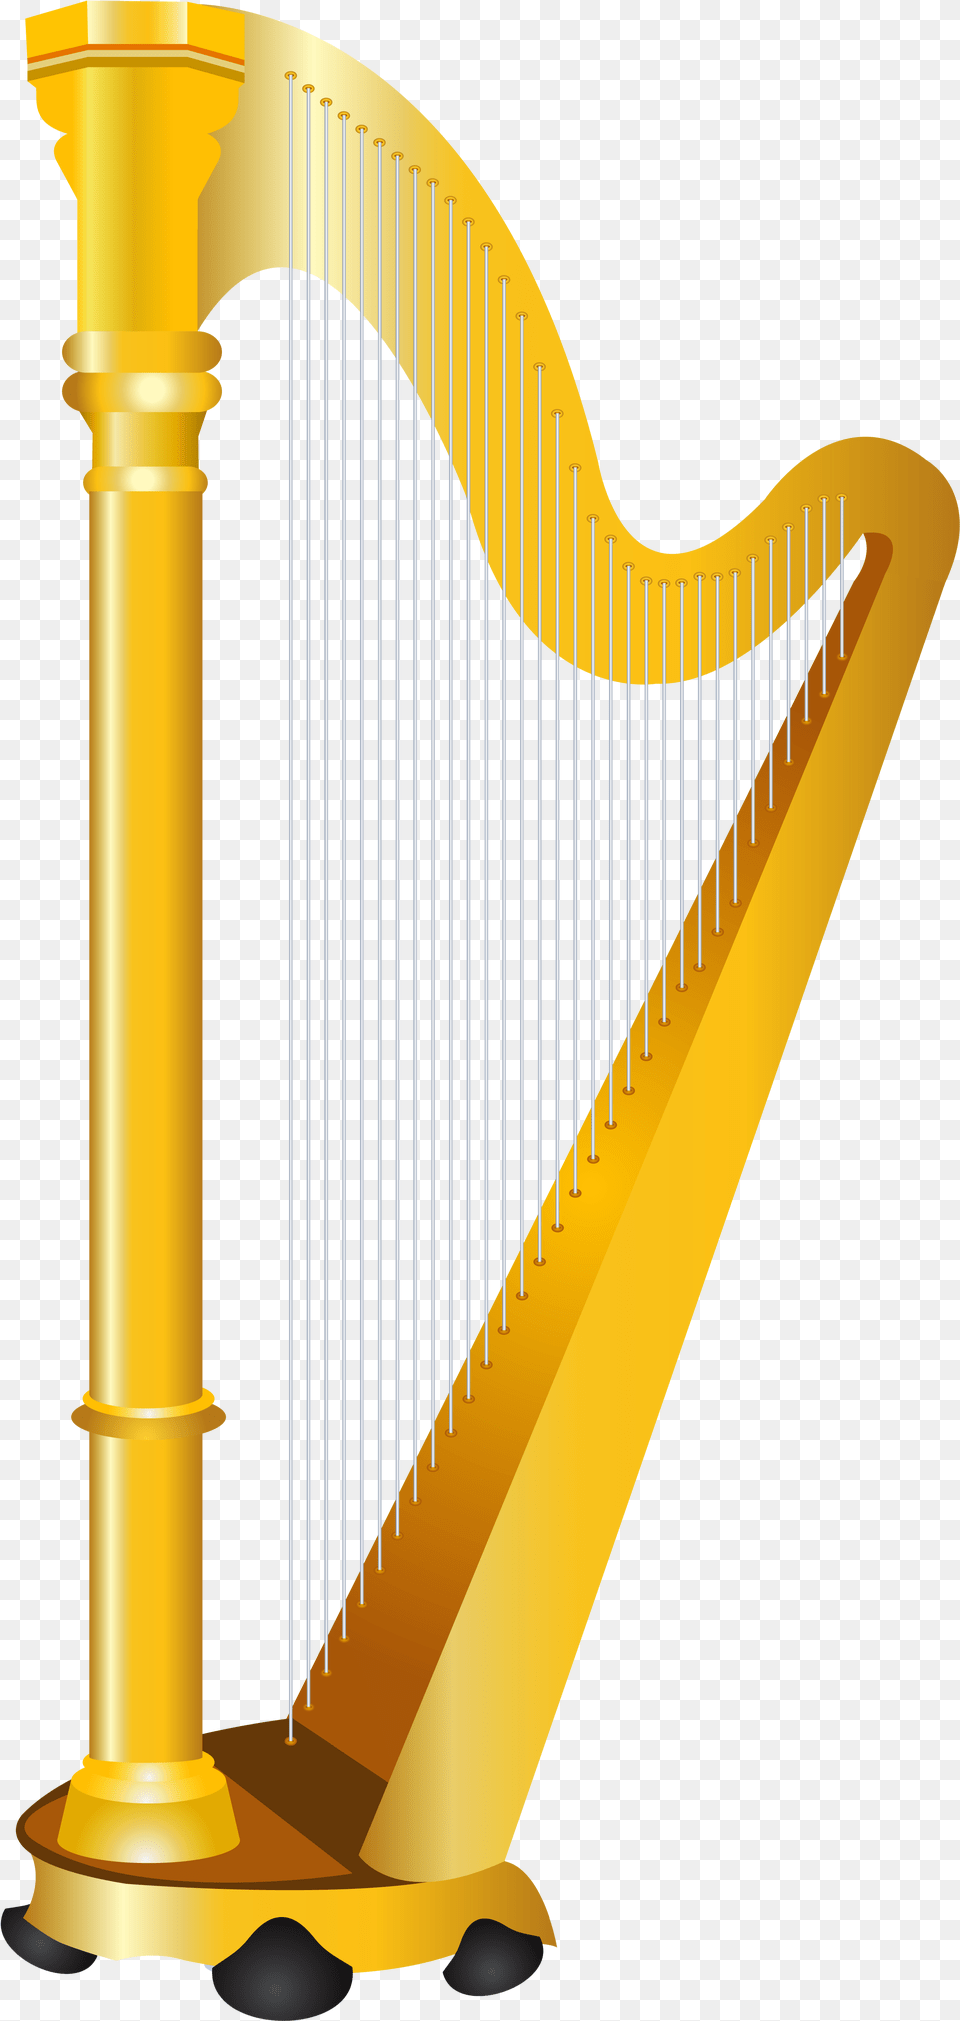 Harp Cliparts Harp Clipart, Musical Instrument Png Image